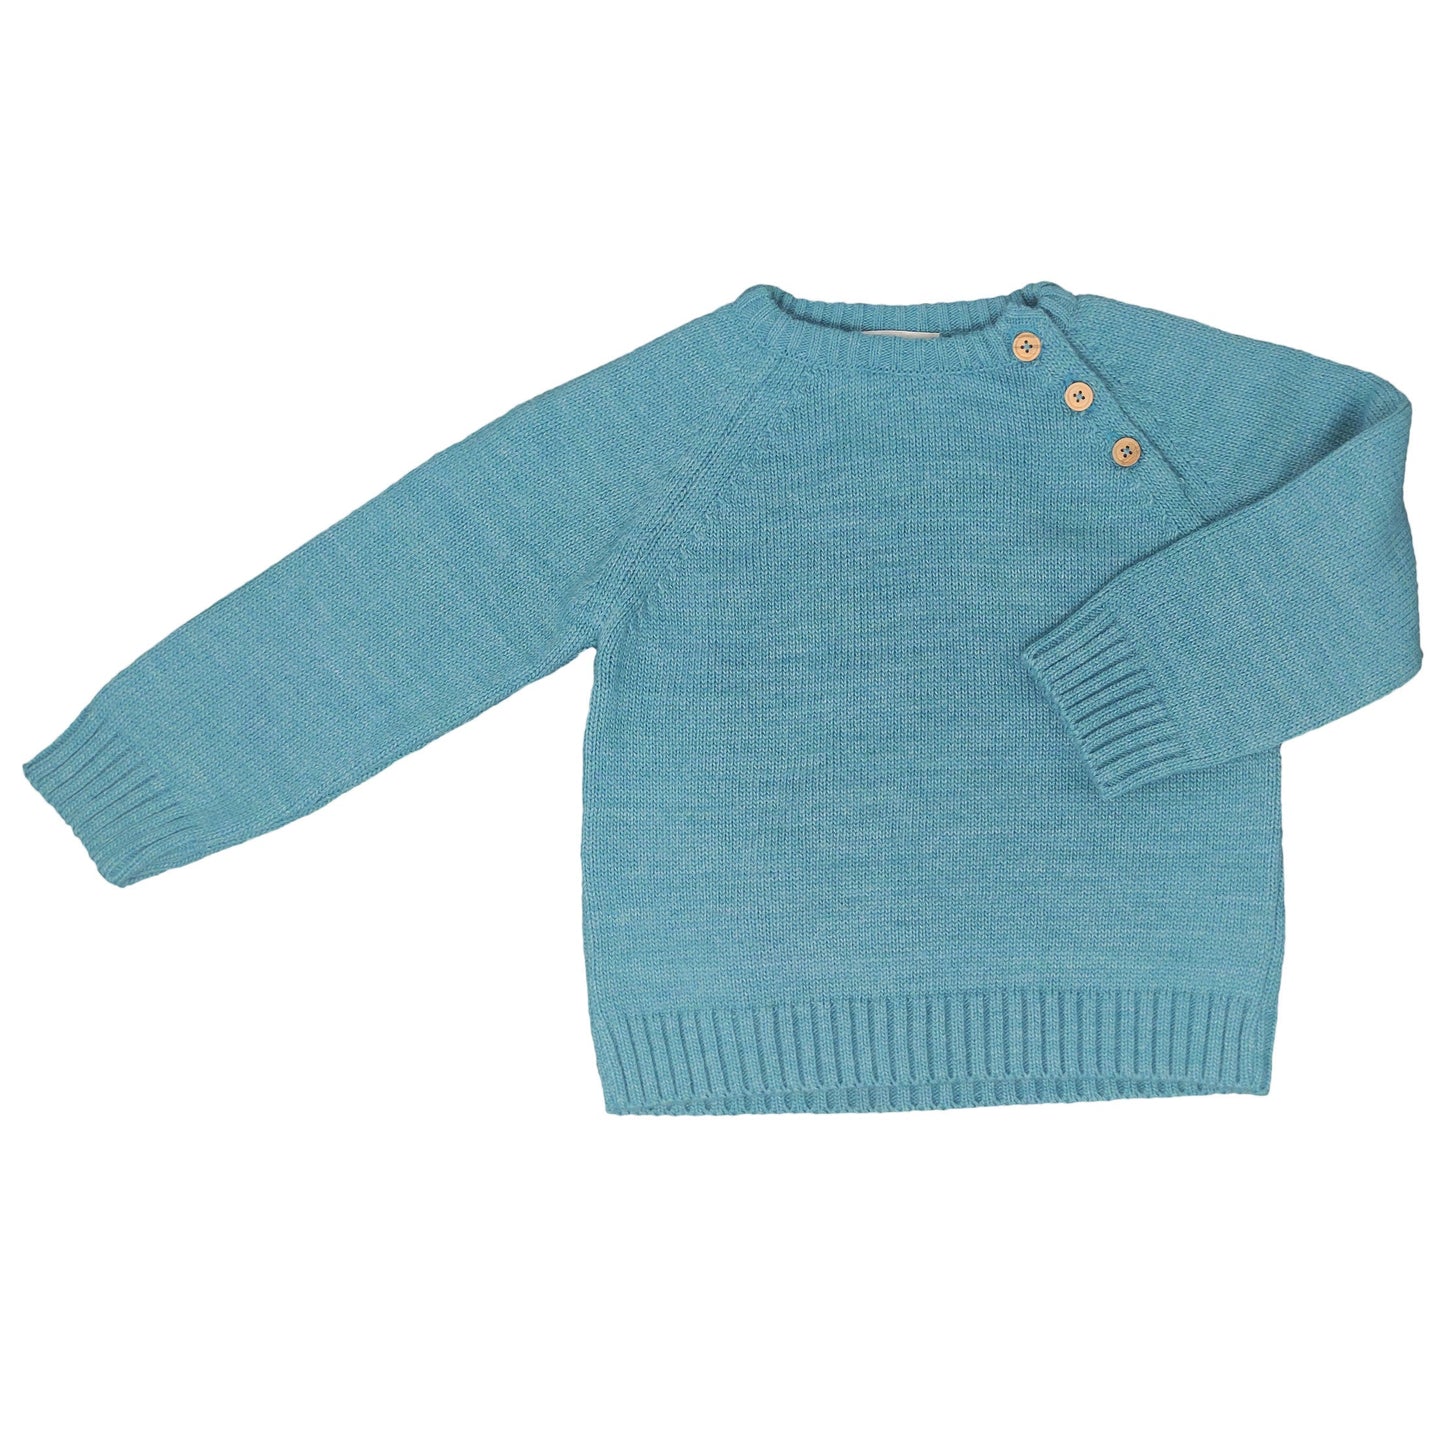 Turquoise knitted pullover |  | Iberica - Pretty things from Portugal